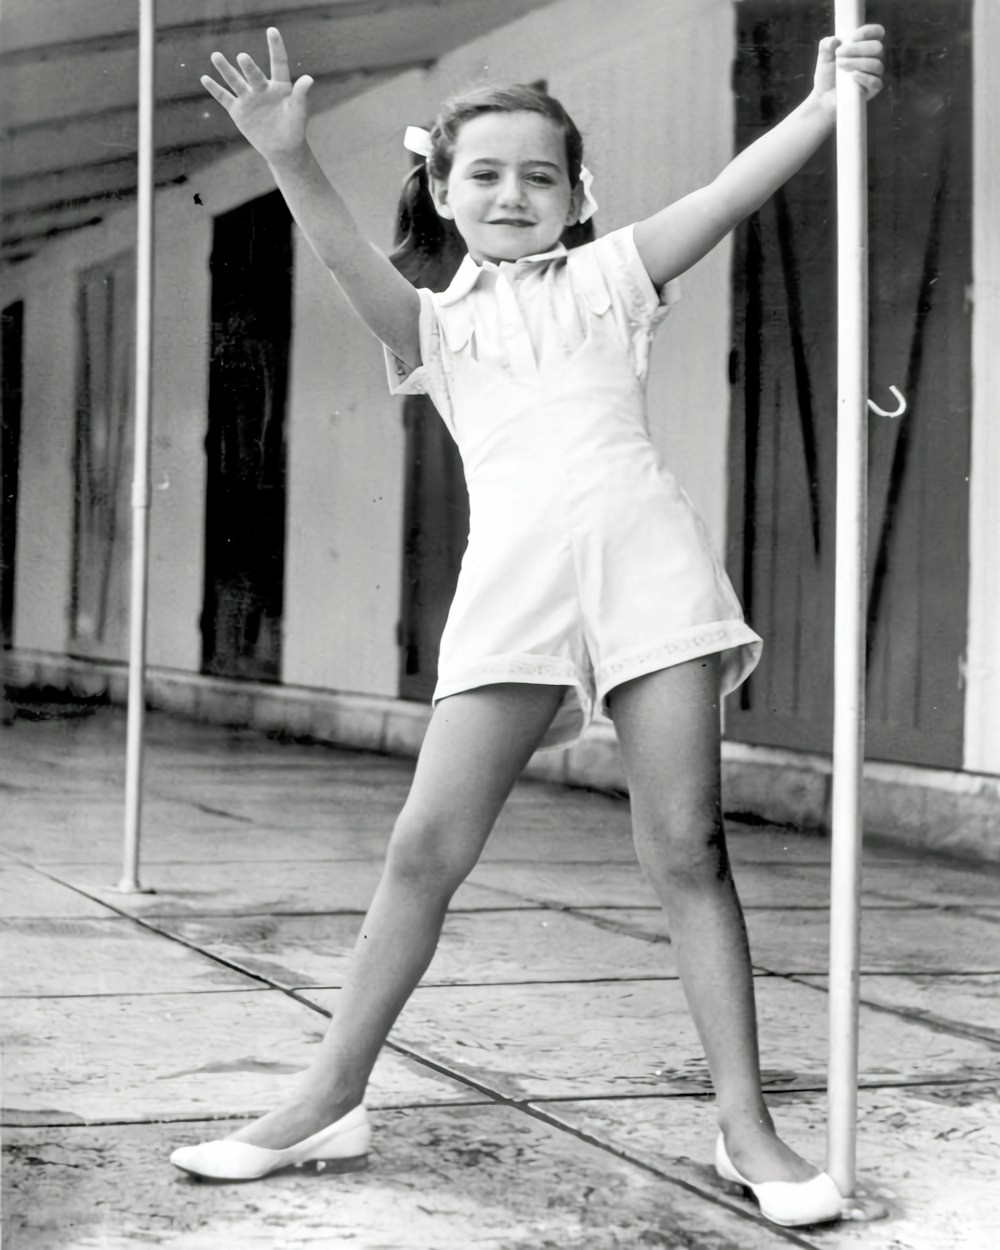 a young girl is holding a pole and posing for a picture